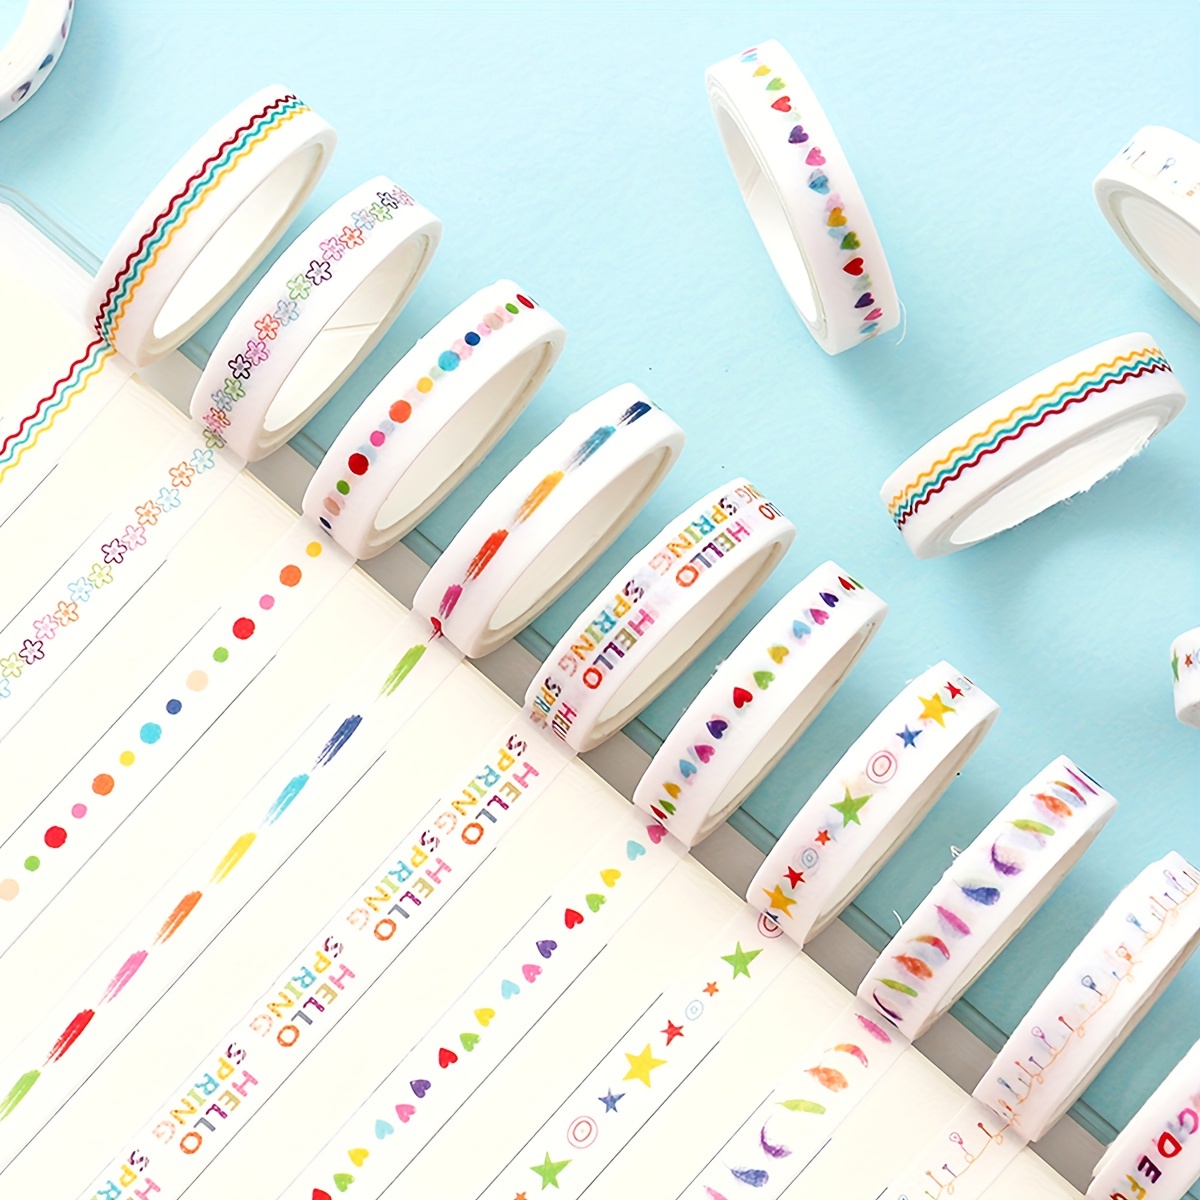 Easiest Rainbow Washi Tape Craft Ever! - I Heart Crafty Things